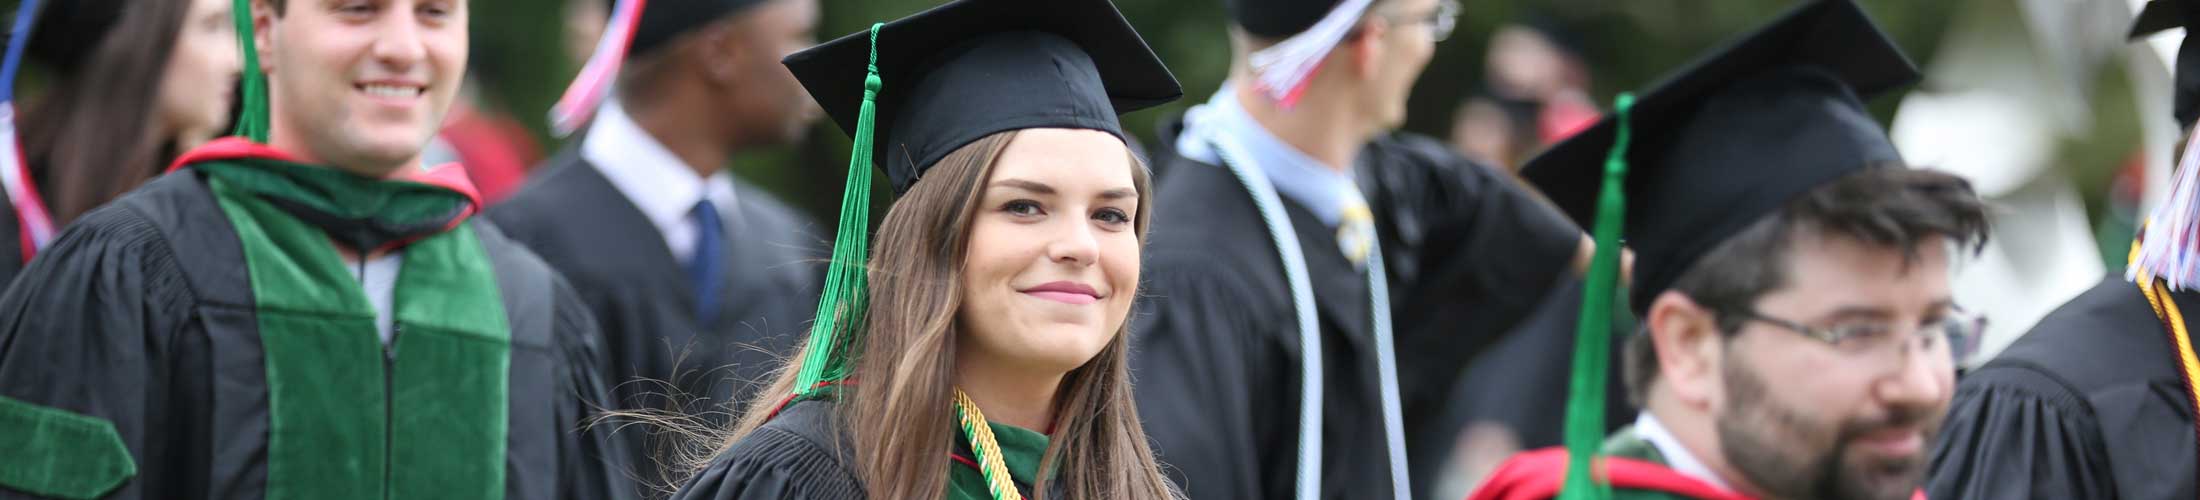 Graduate smiling at camera outside walking to commencement